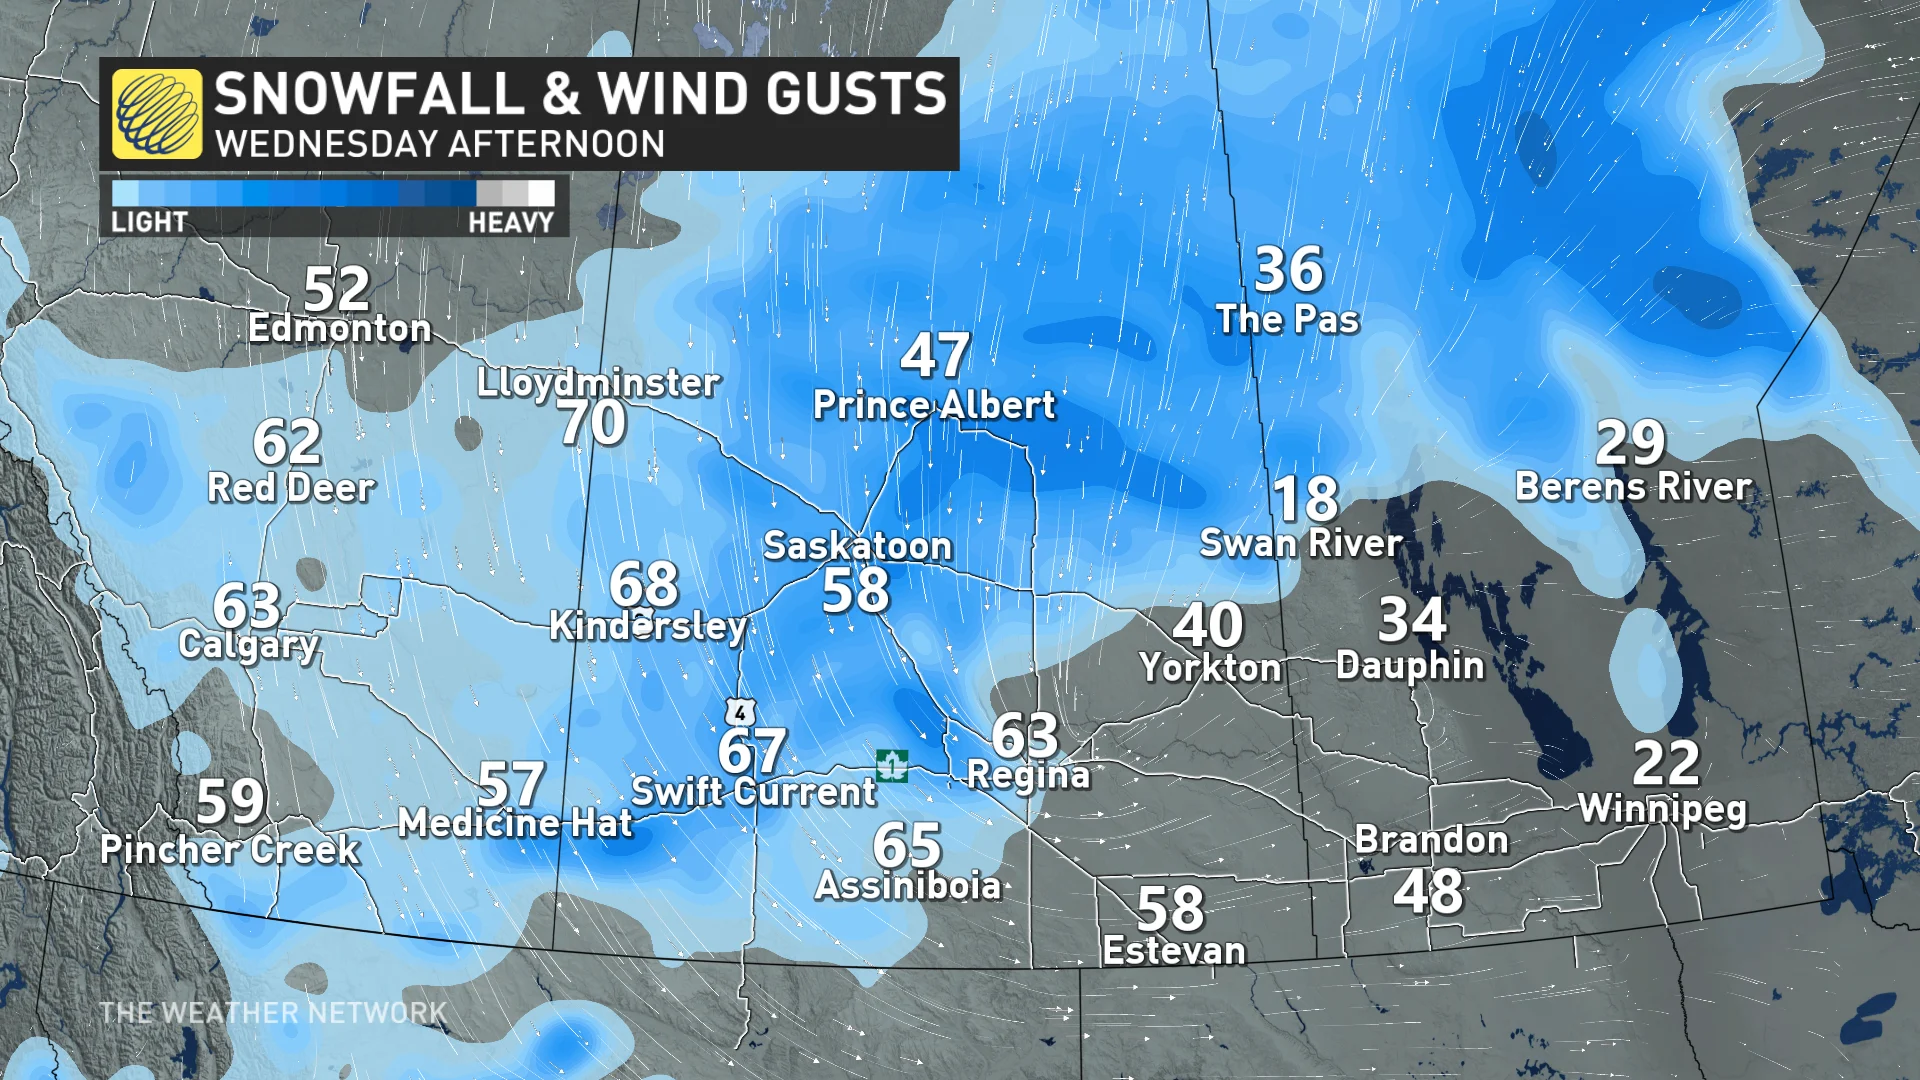 Prairies wind and snow gusts Wednesday (updated April 16)